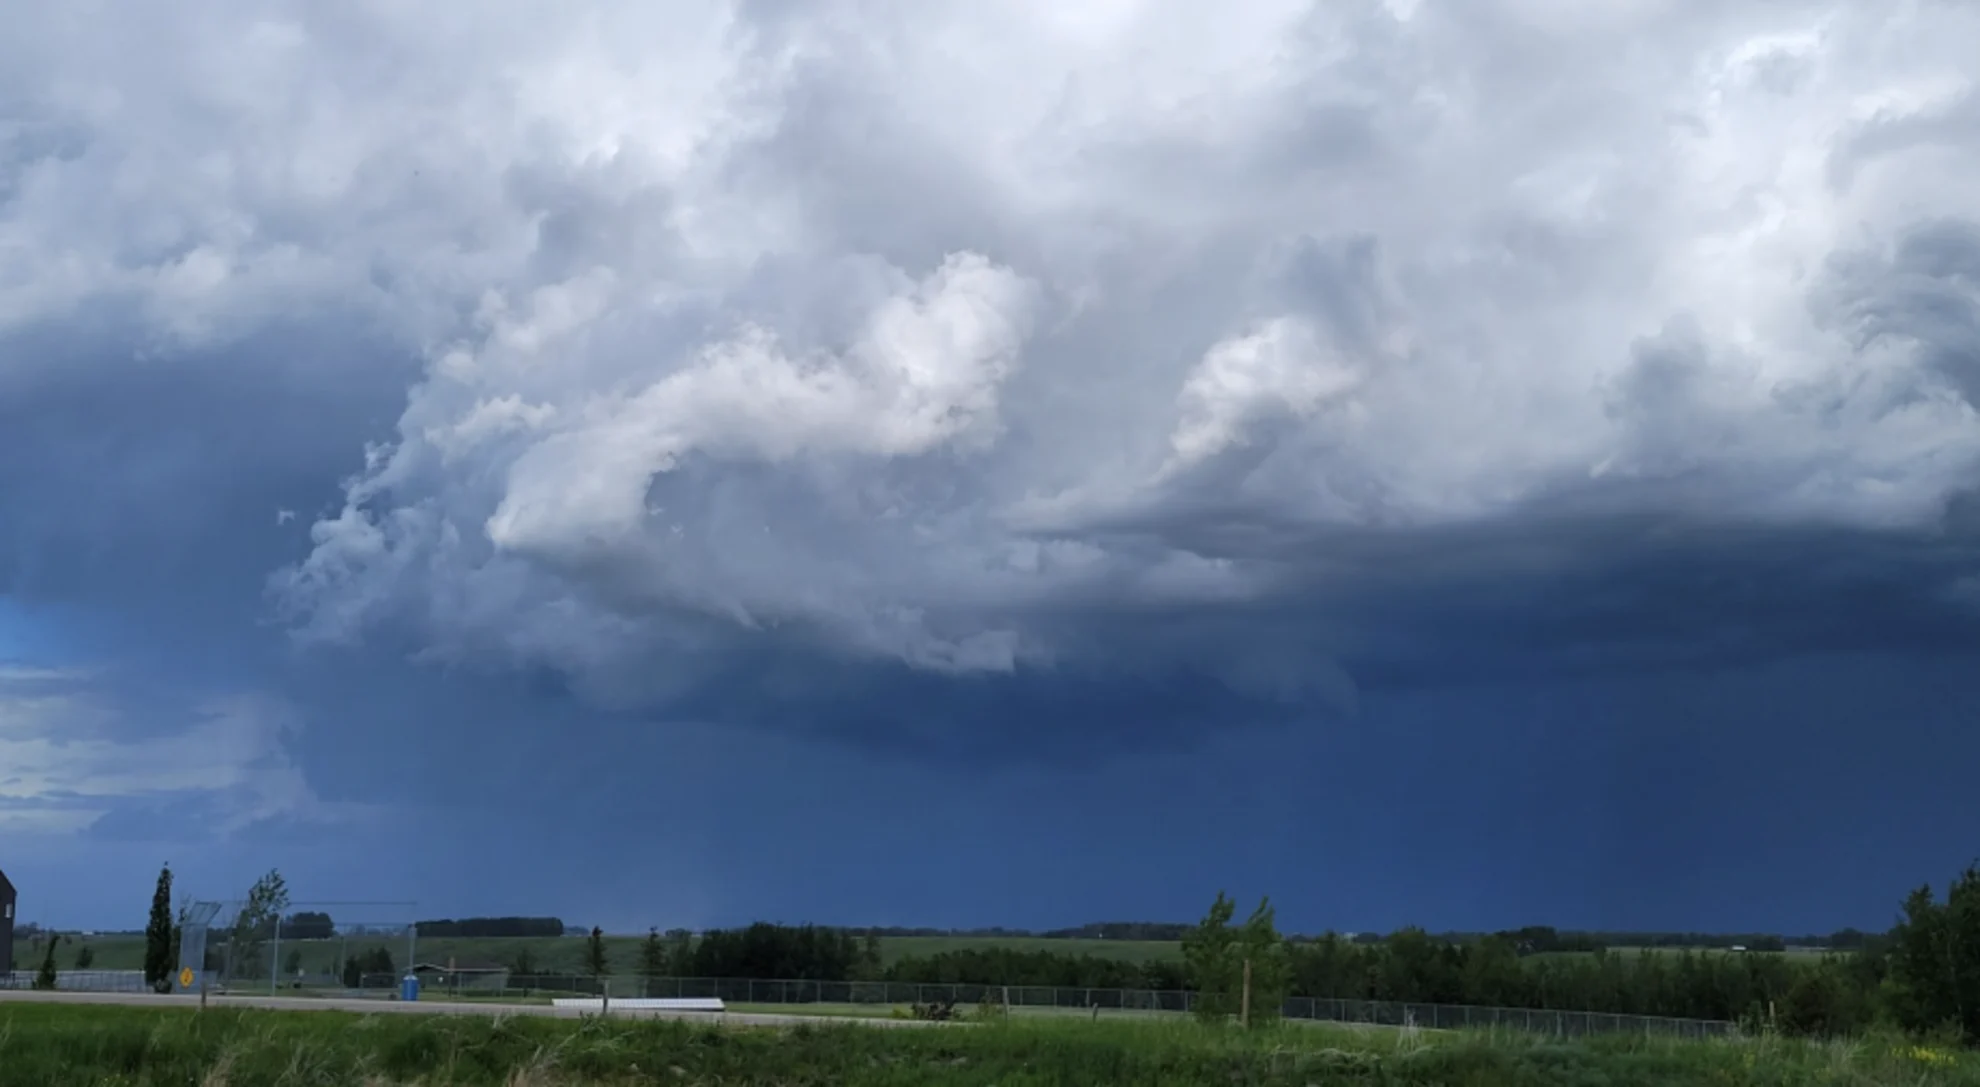 Multi-day storm risk bubbles up over the Prairies, risk of strong winds, hail